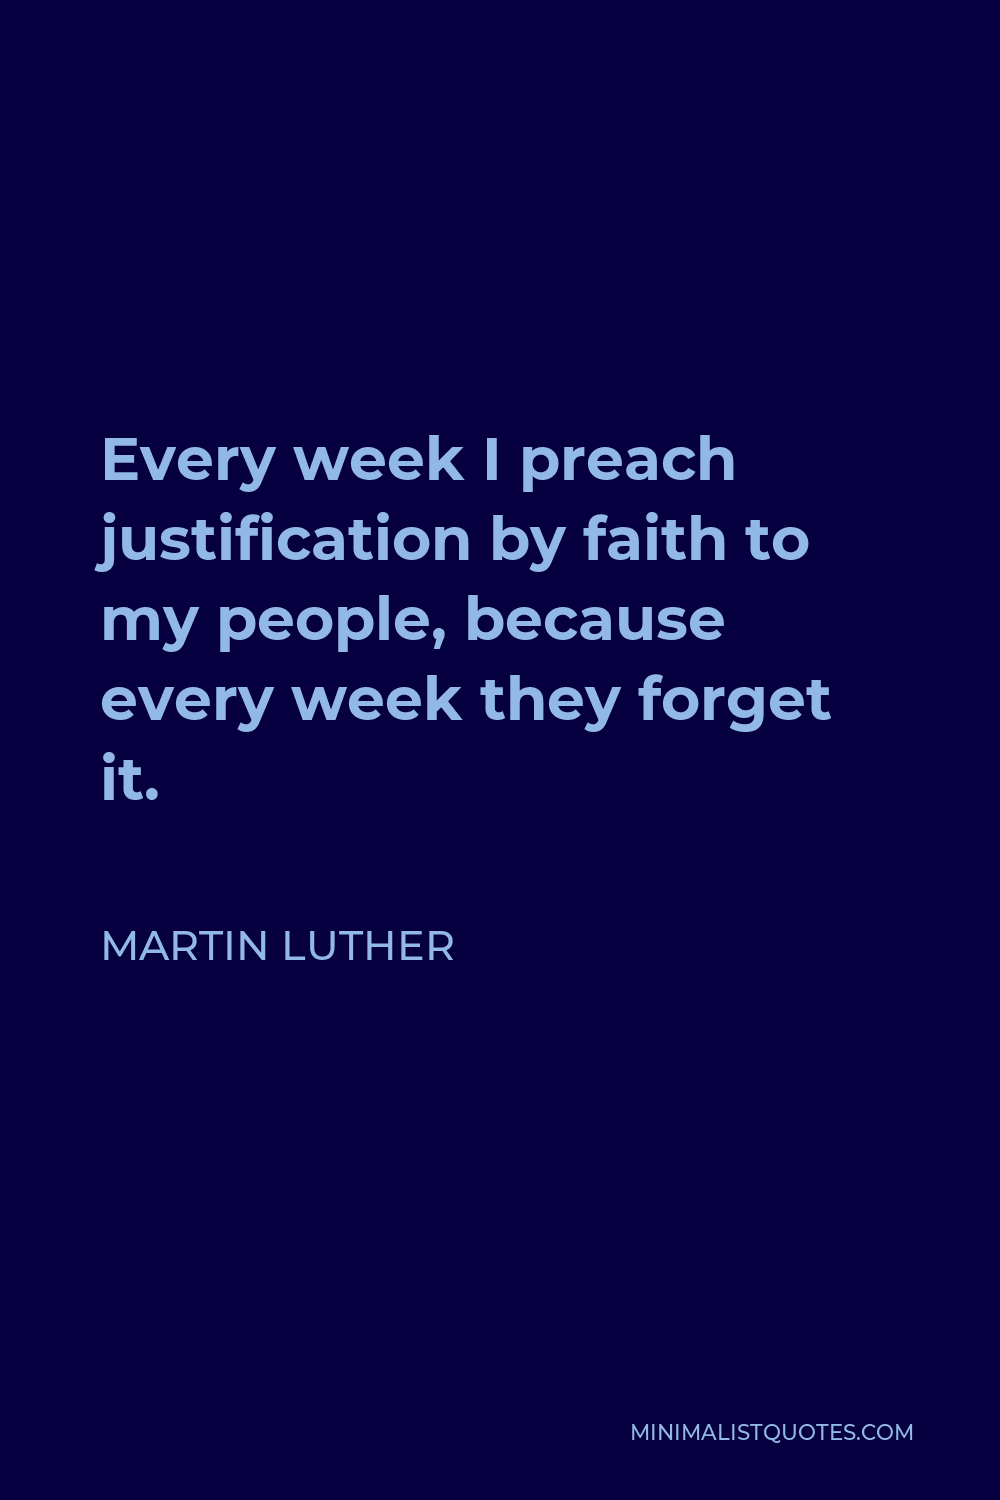 Martin Luther Quote - Every week I preach justification by faith to my people, because every week they forget it.